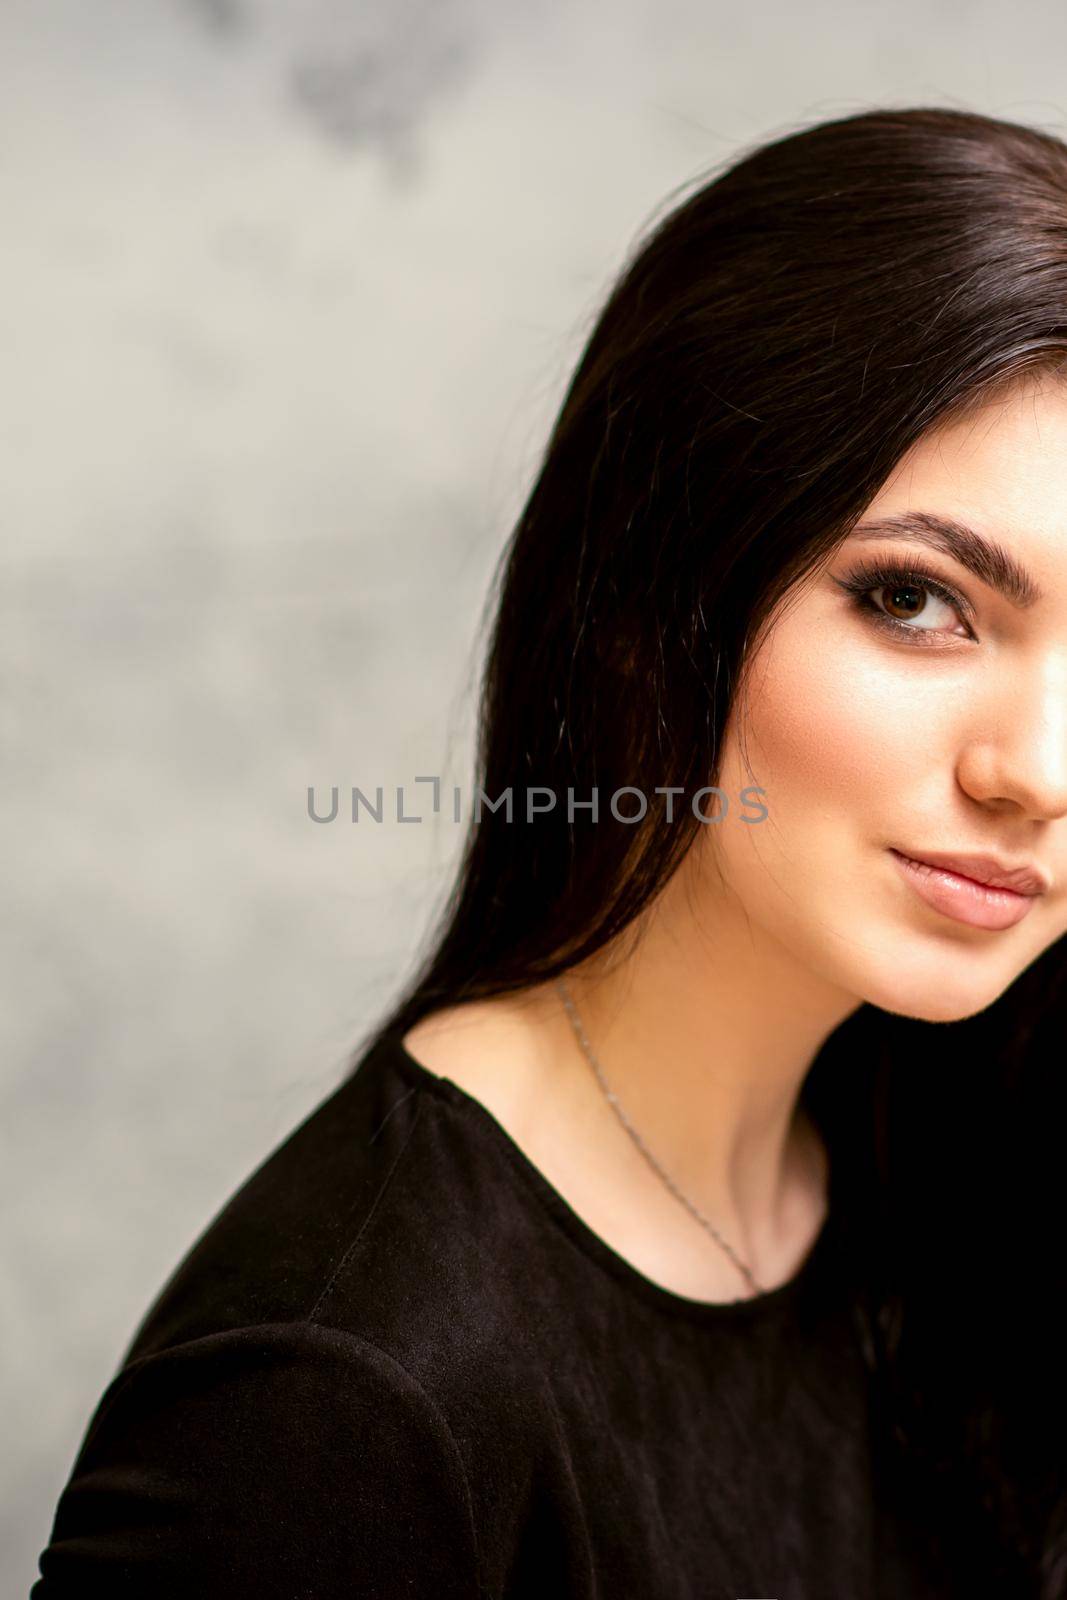 The fashionable young woman. Portrait of the beautiful female model with long hair and makeup. Beauty young caucasian woman with a black hairstyle on the background of a gray wall